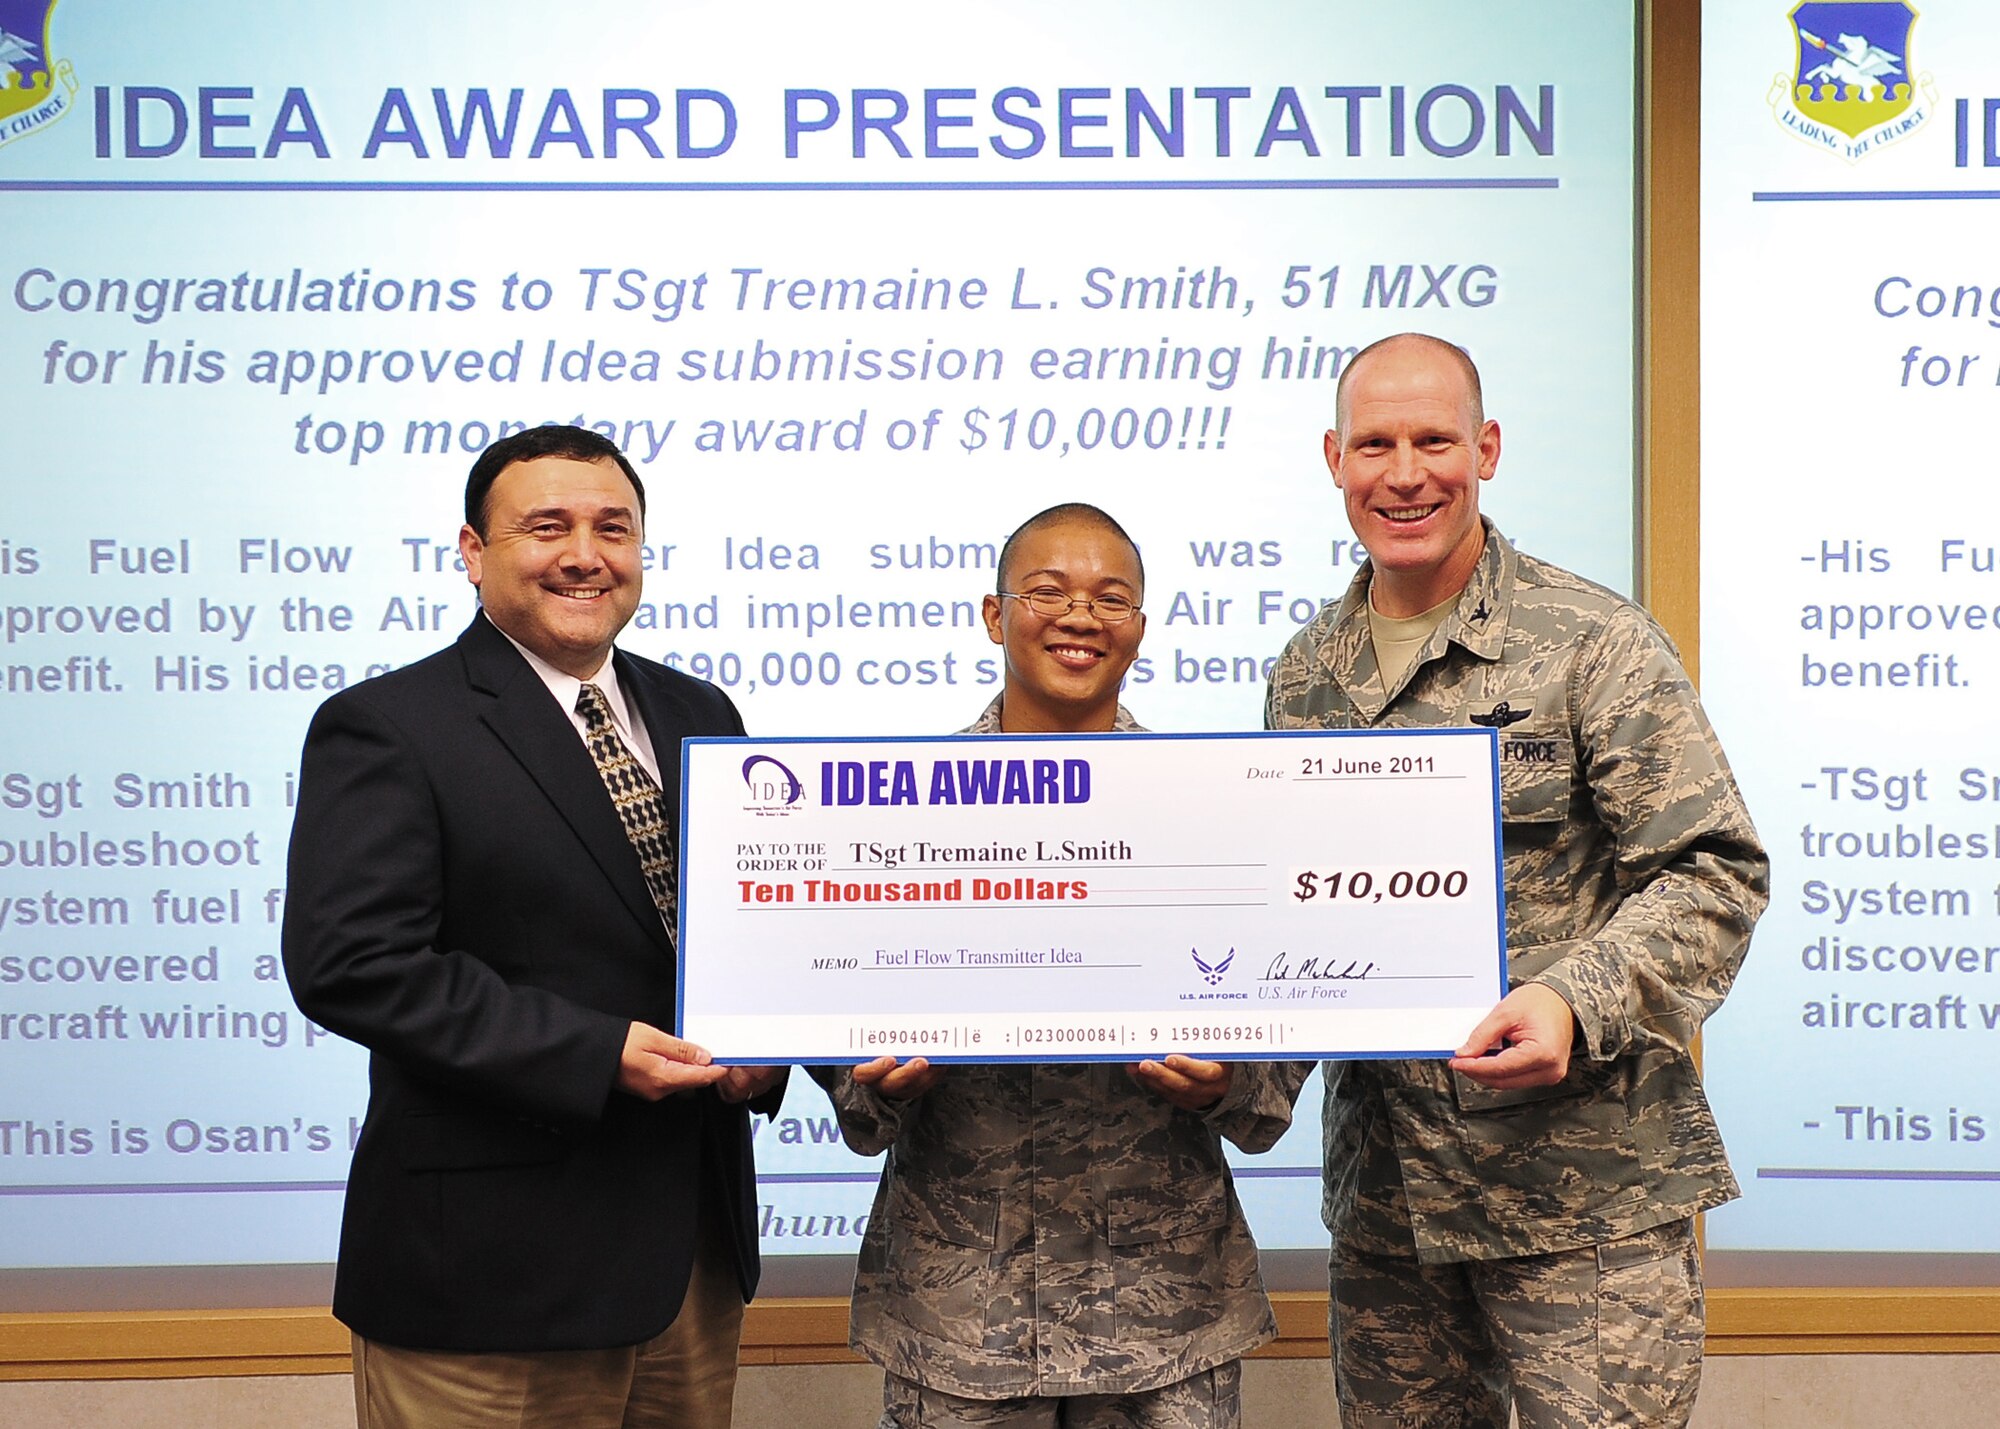 Col. Patrick Malackowski and Ed Moreno present Tech. Sgt. Tremaine Smith with a check for $10,000 June 21, 2011, at Osan Air Base, South Korea. Sergeant Smith was recognized through the Innovative Development Employee Awareness program for an idea that fixed a fuel-flow transmitter problem, saving the Air Force more than $90,000 in replacement costs over the next year. (U.S. Air Force photo/Senior Airman Evelyn Chavez)